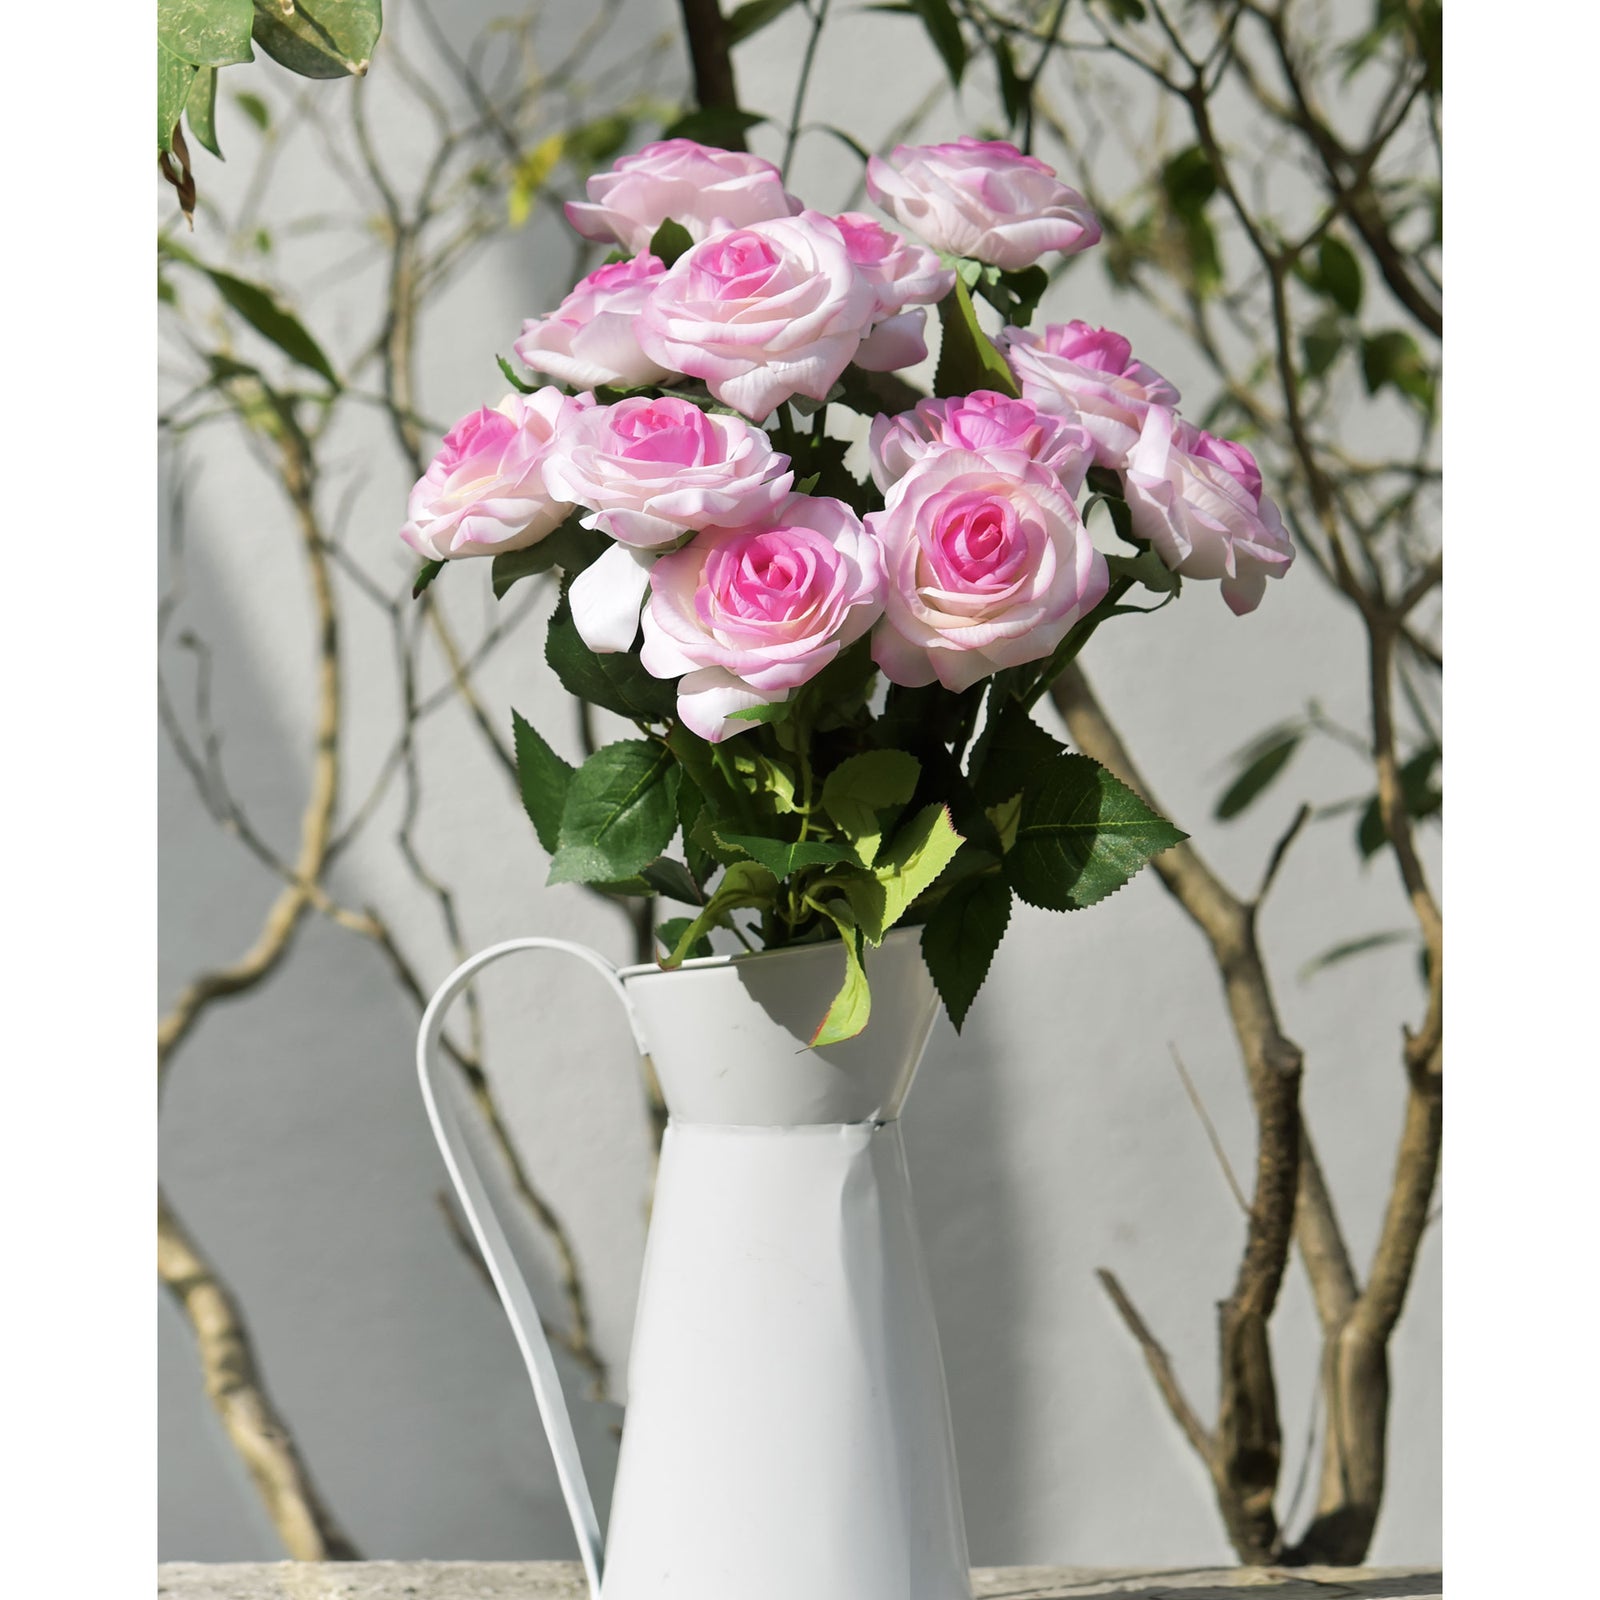 White | Purple Real Touch Silk Artificial Flowers ‘Petals Feel and Look like Fresh Roses 10 Stems